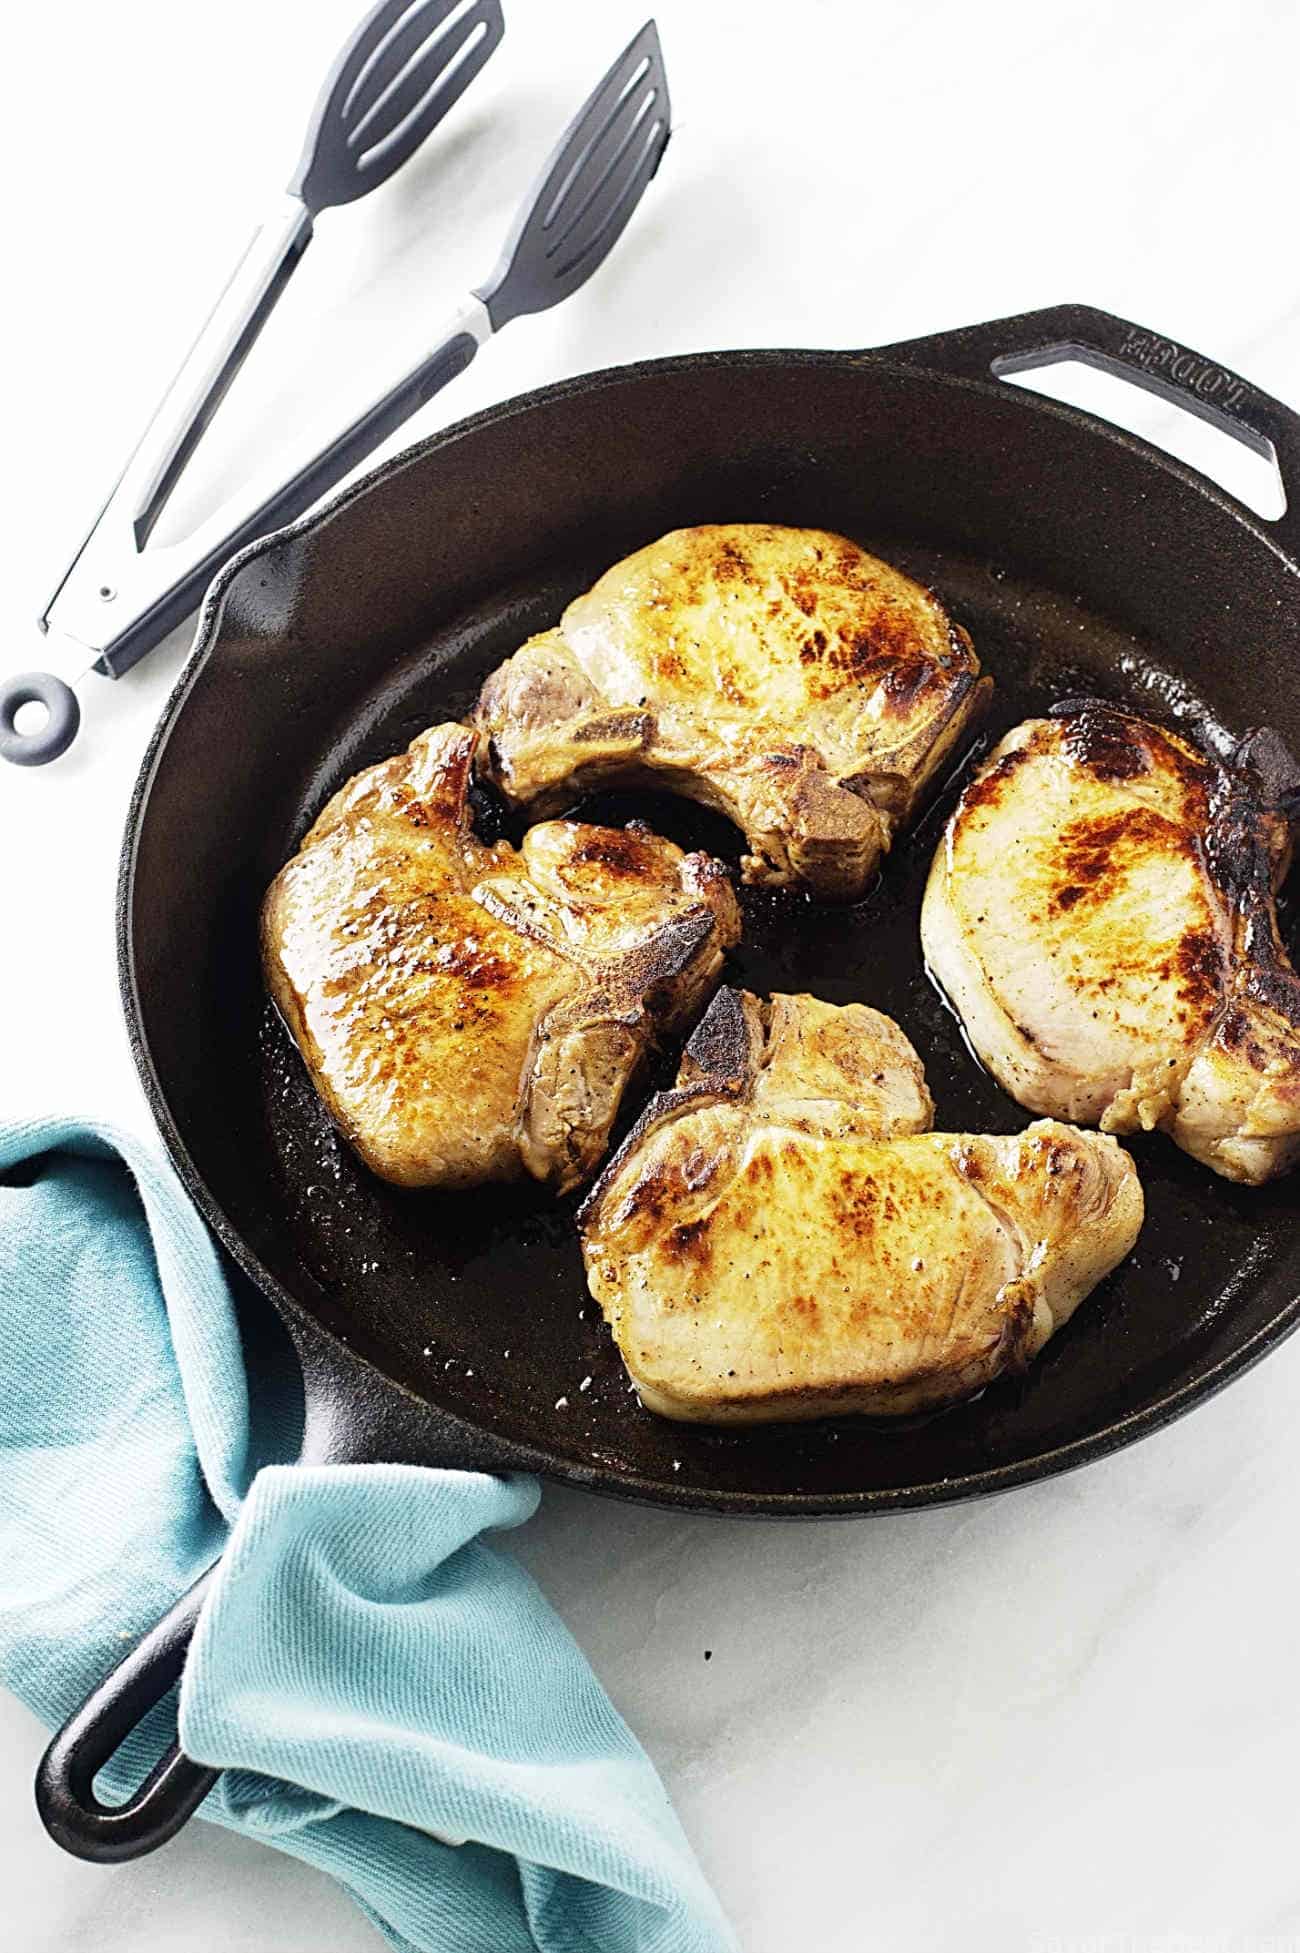 Roasted Pork Chops with Onions and Apples - Savor the Best